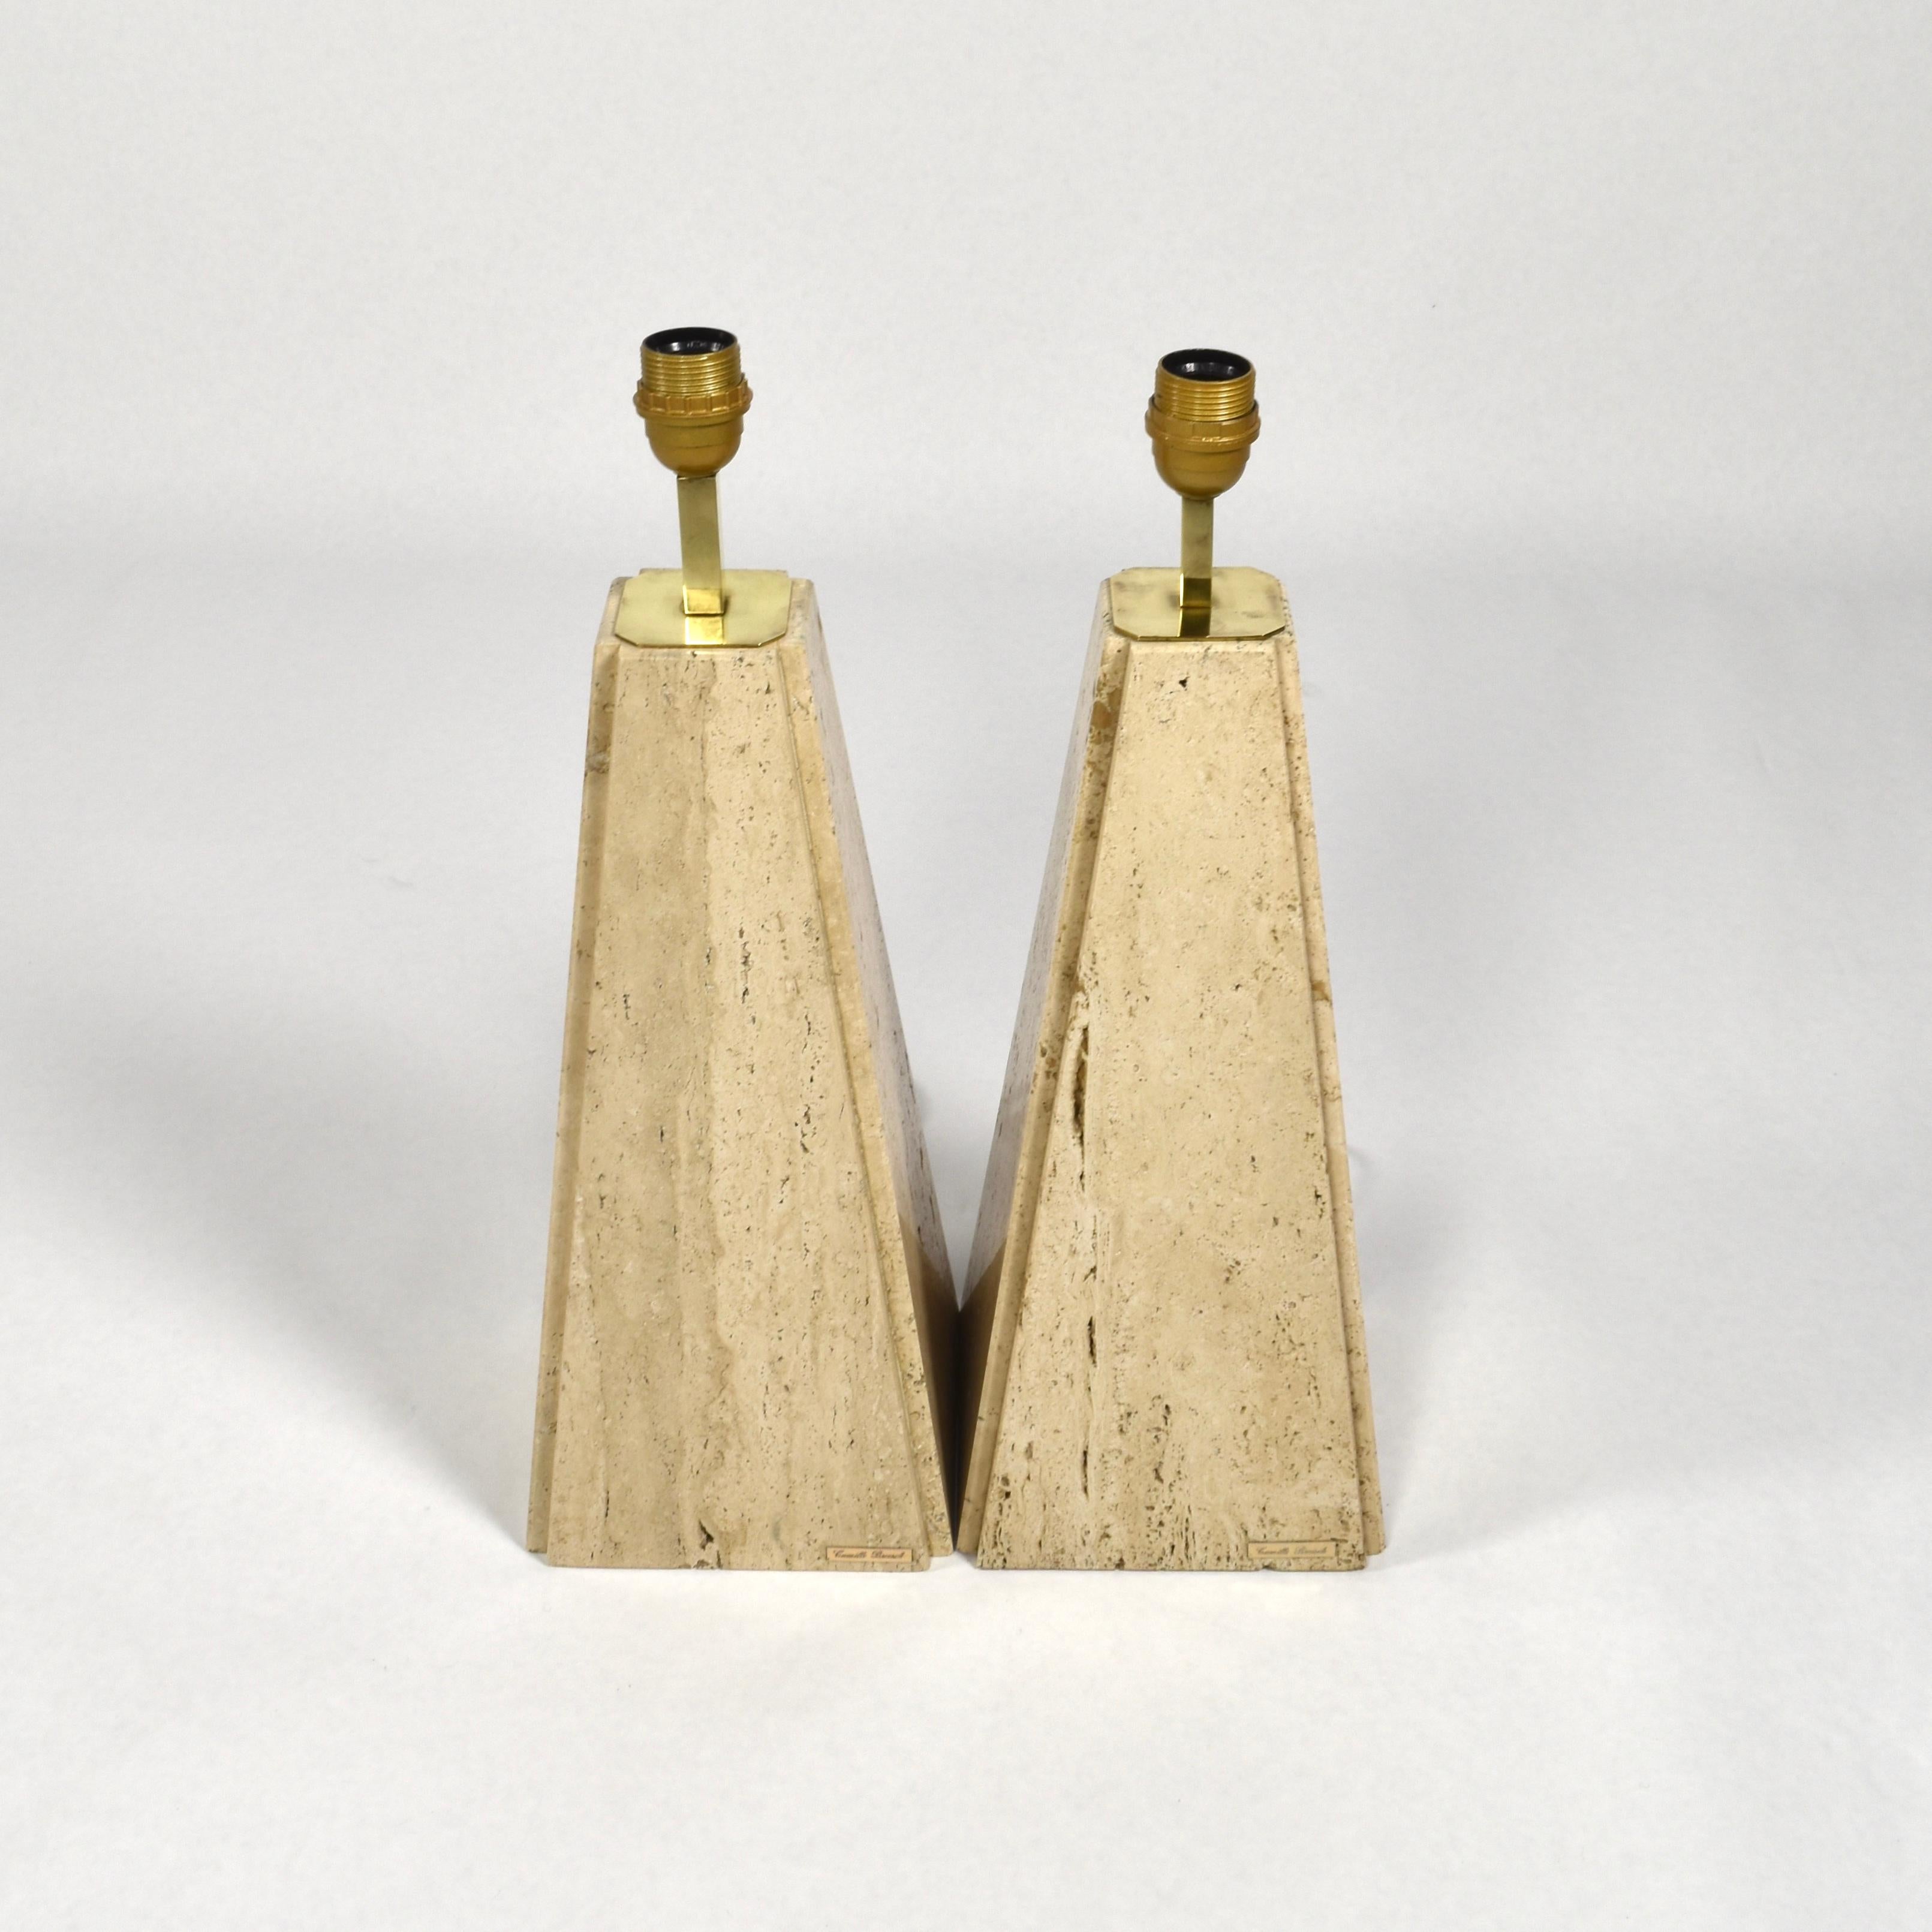 Pair of Camille Breesch Travertine and Brass Table Lamps, Belgium, circa 1970 1